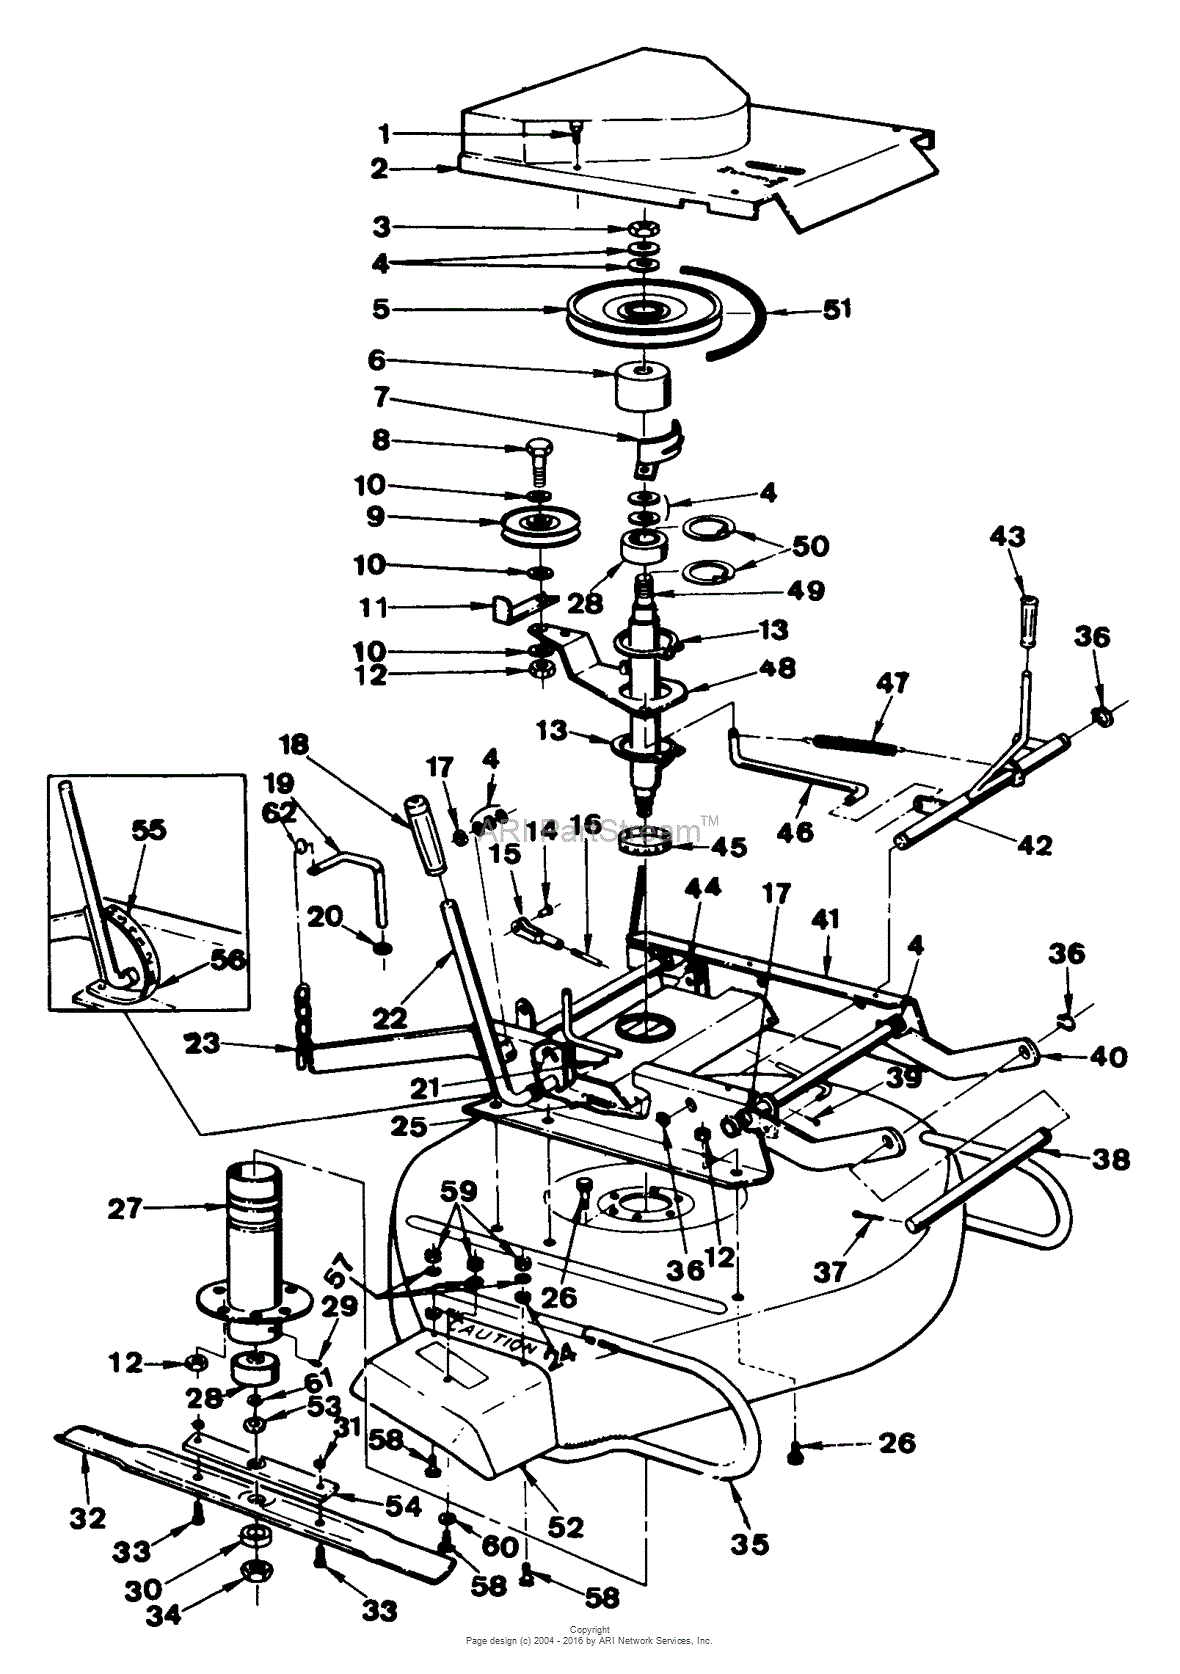 wiring diagram for 23hp z-force 50